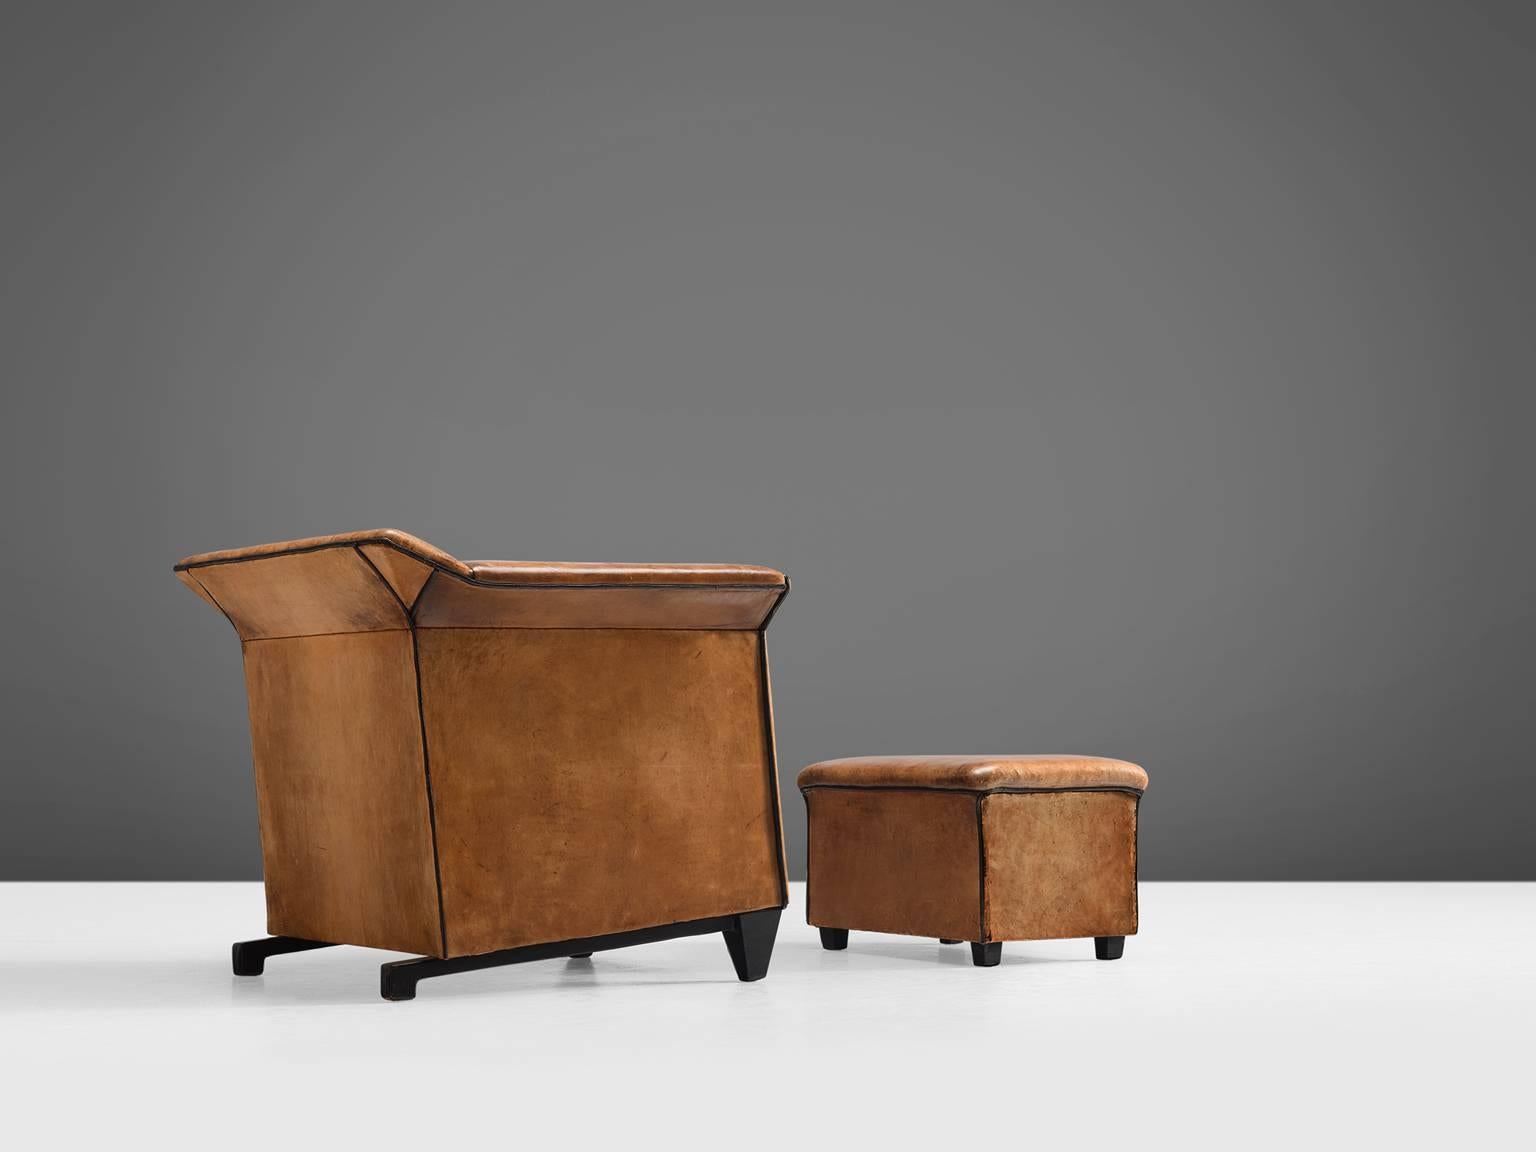 Cognac leather club chair with matching ottoman, Europe, 1960s.

Patinated club chair with matching ottoman in cognac leather. The sturdy design has an interesting base that gives the model certain lightness. The hefty shape of these comfortable